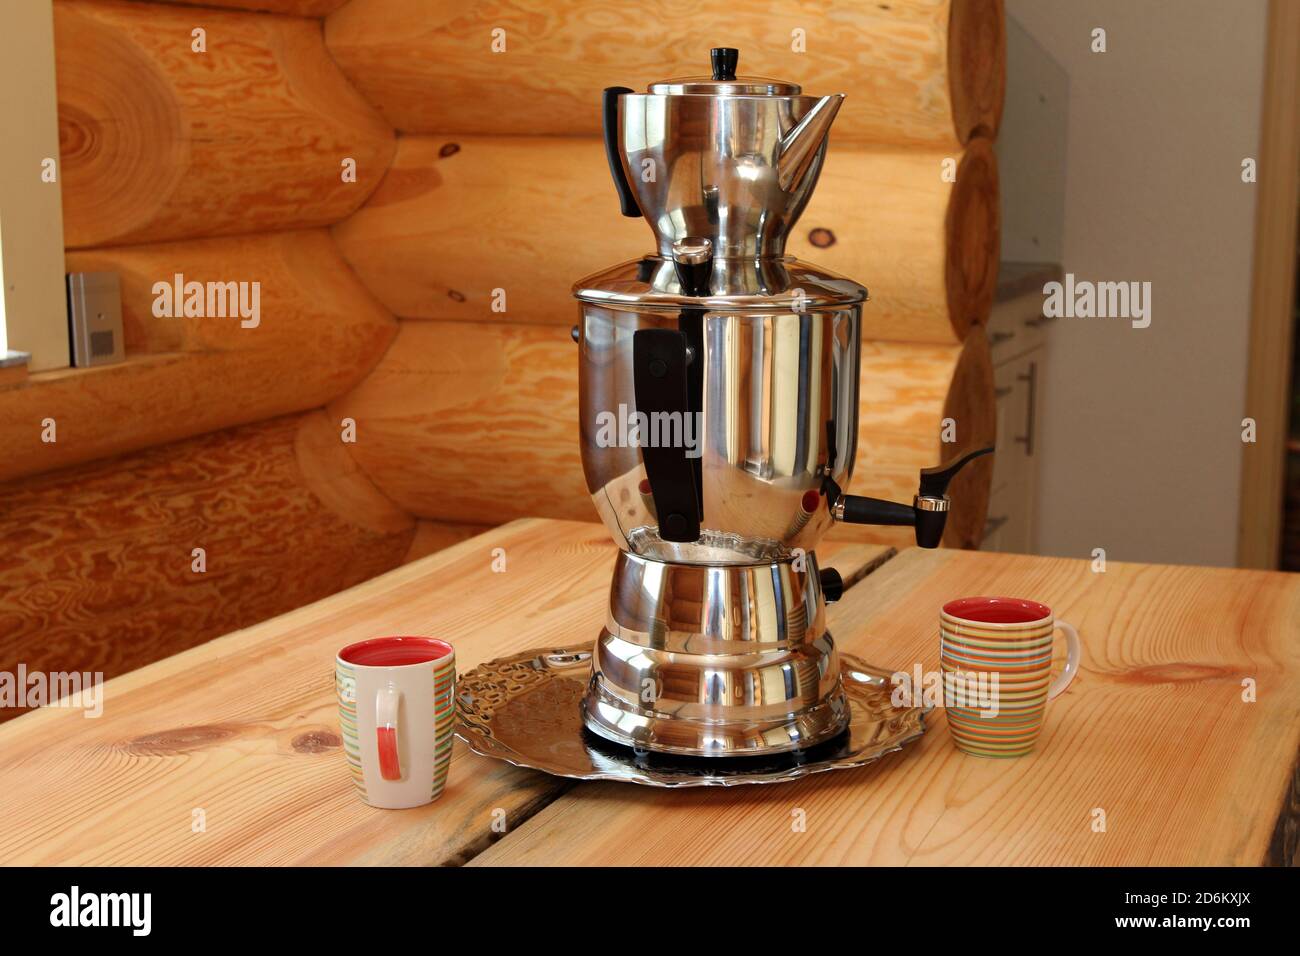 stock and Alamy samovar - photography Vintage hi-res images